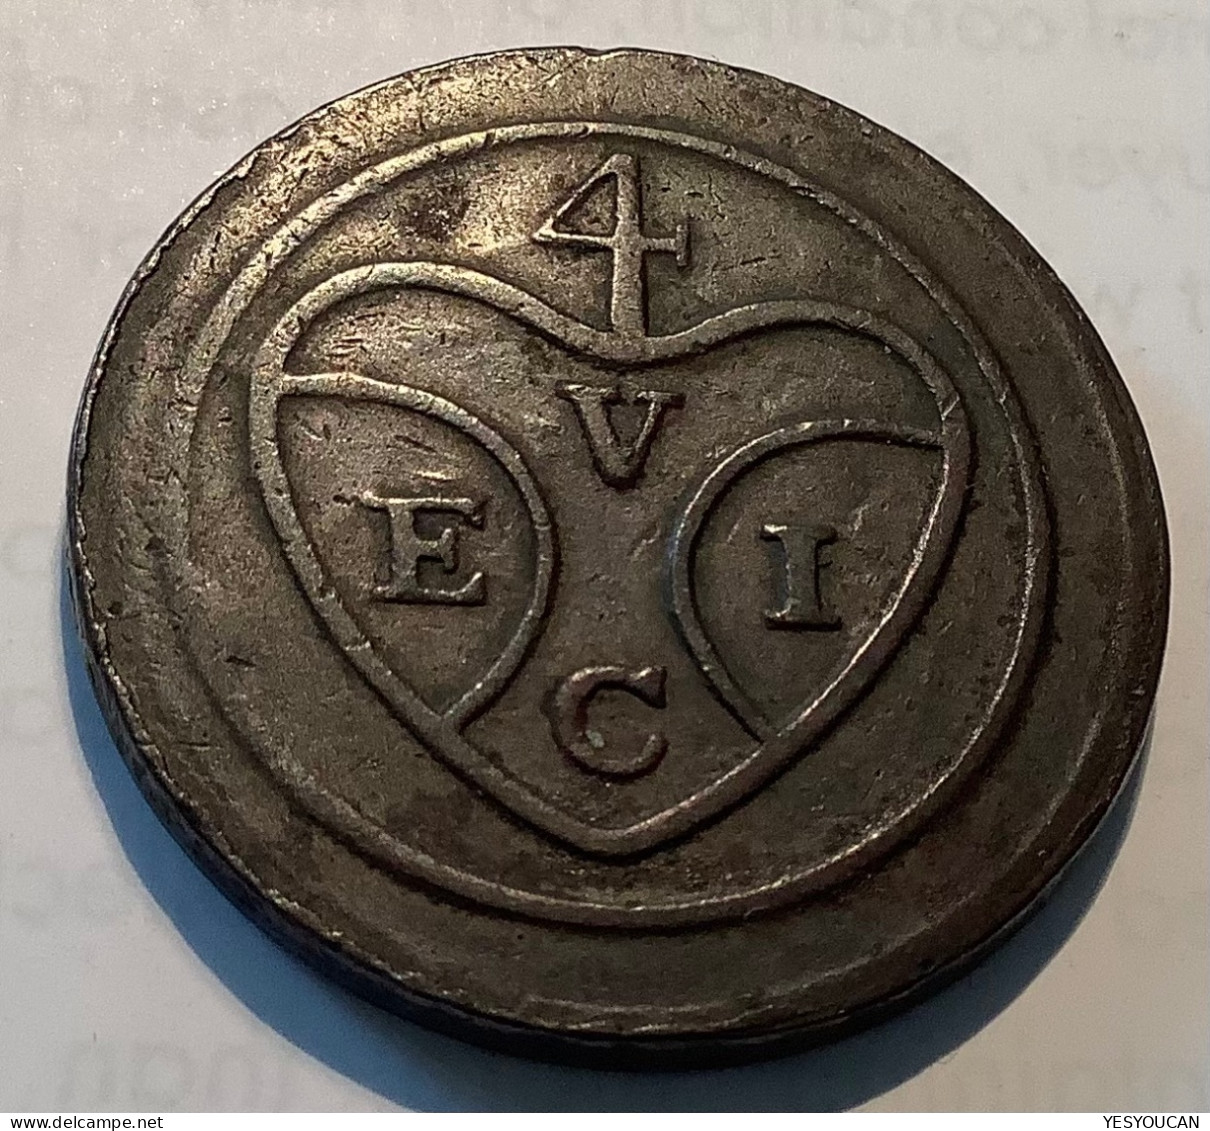 East India Company 19th C. Scarce Bronze Weight Or Token "4 / V E I C", Very Fine (Inde, Coin Monnaie - Indien